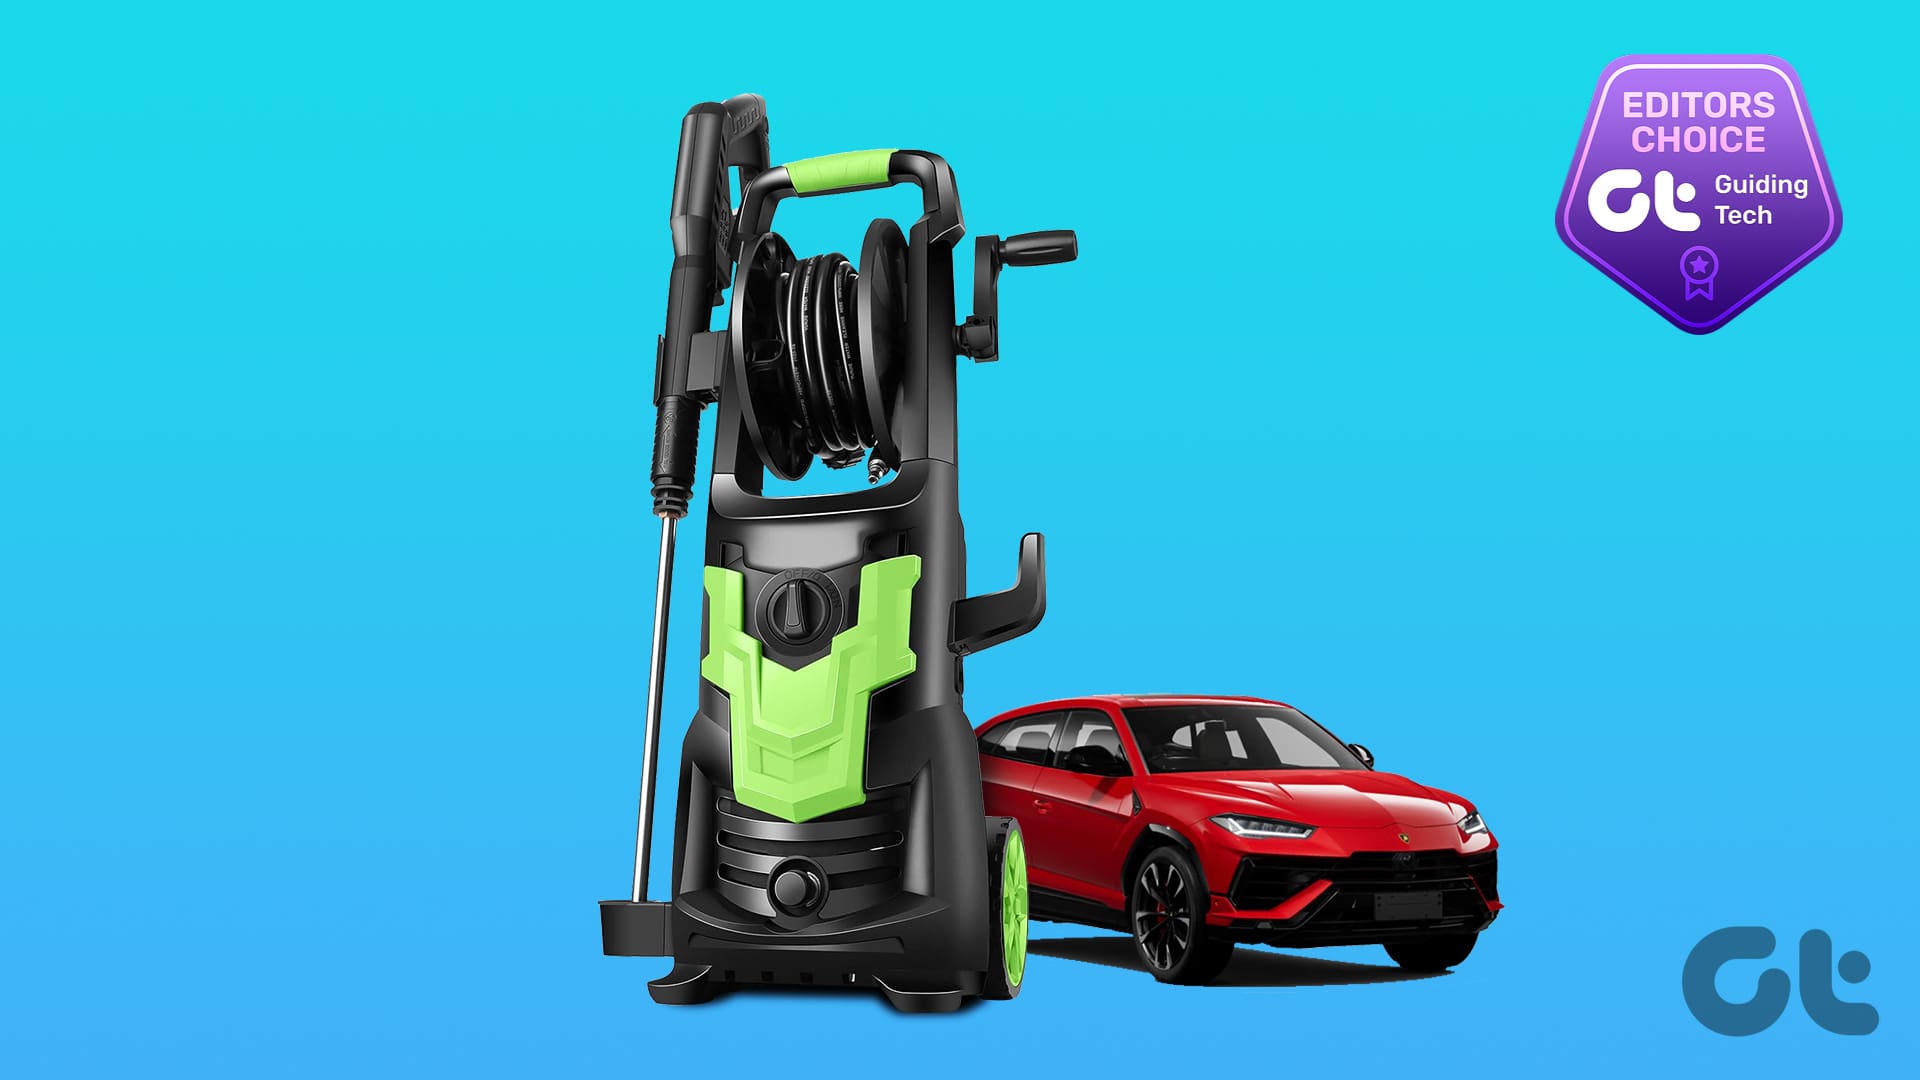 5 Best Electric Pressure Washers for Cars